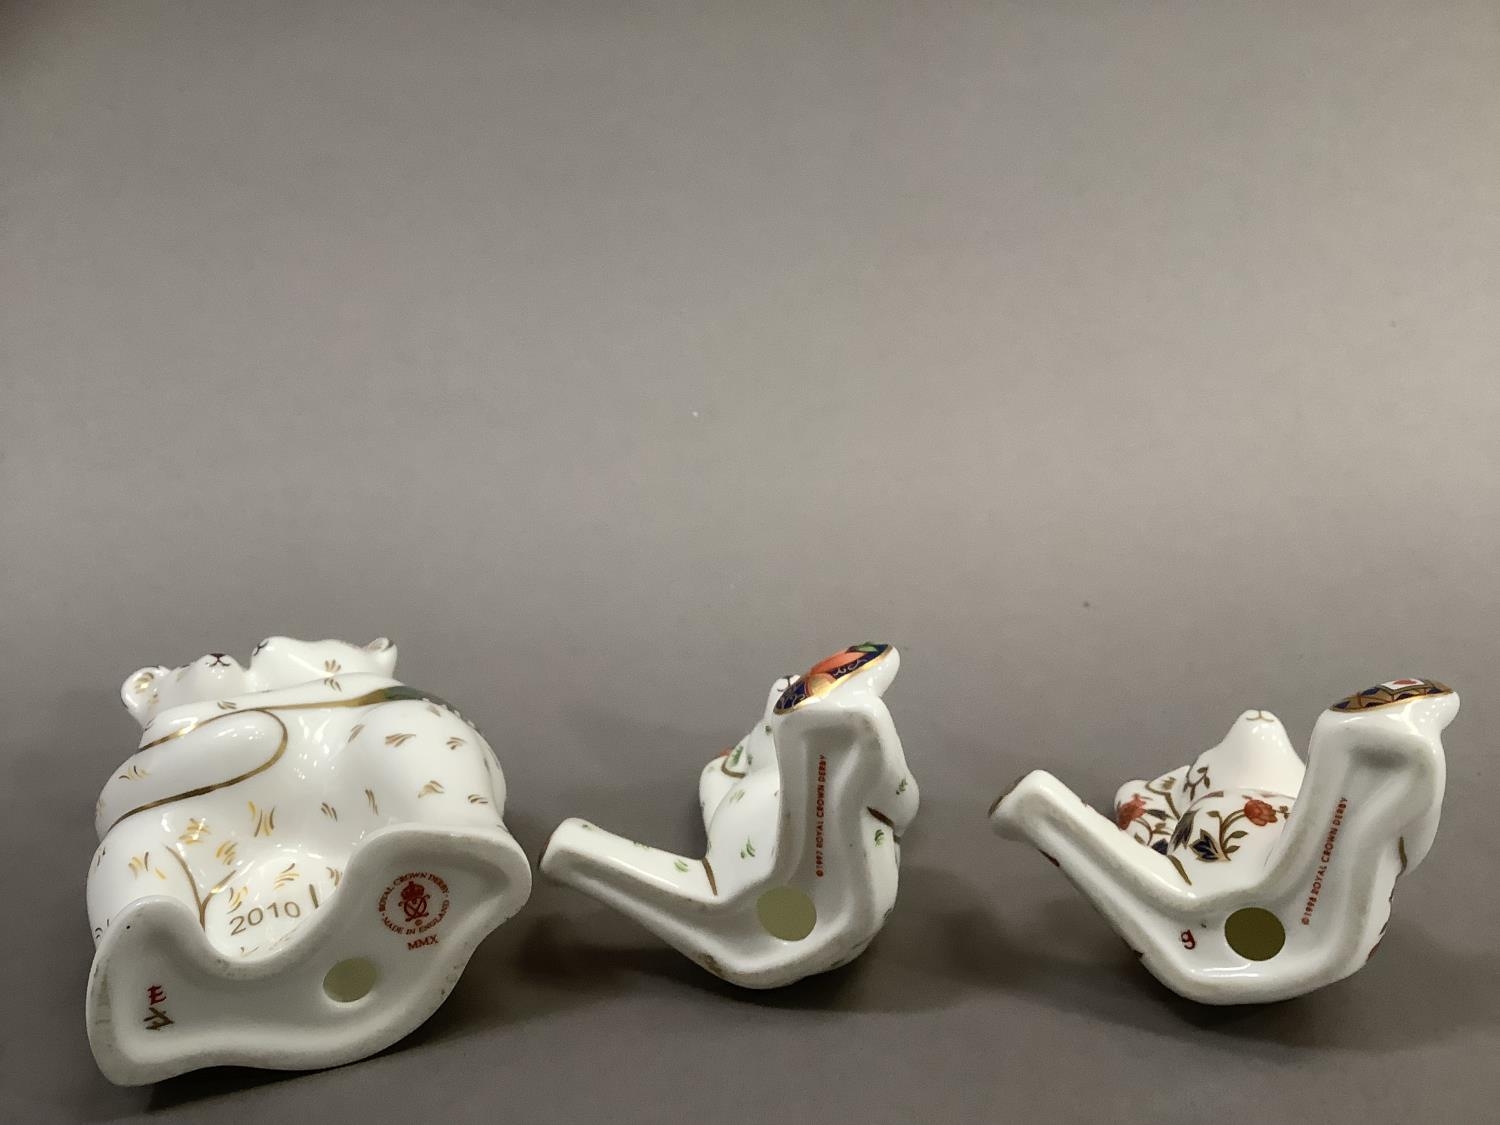 A group of Royal Crown Derby teddy bears including two bears hugging with year 2010 and two seated - Image 4 of 4